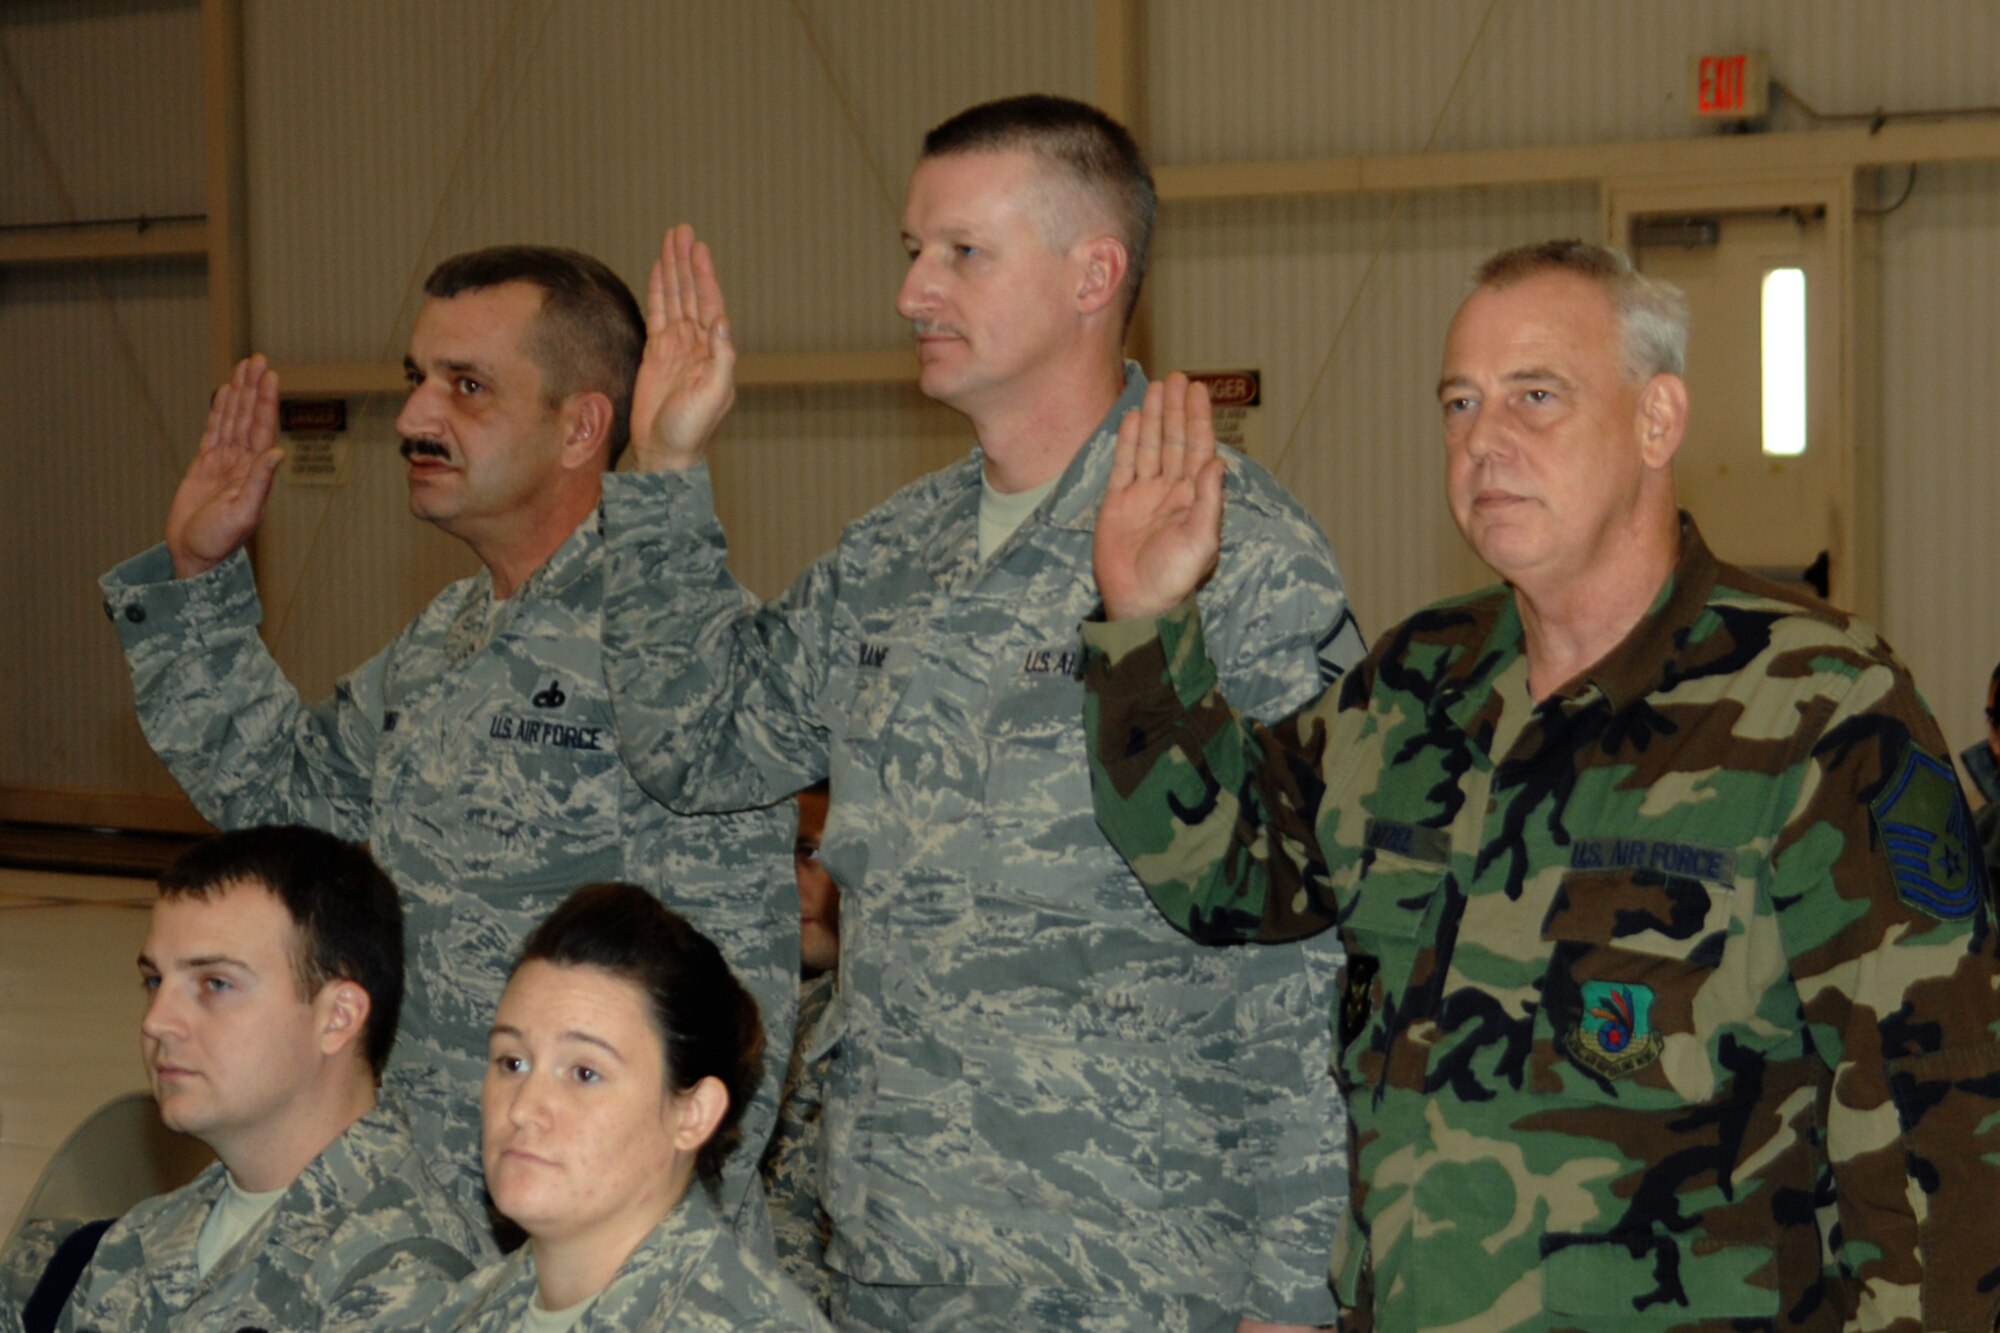 GRISSOM AIR RESERVE BASE, Ind. -- From left, Master Sgts. Rodney Waikel, Charles Drane and John E. Bitzel, Jr., recite a senior noncommissioned officer pledge during a special induction ceremony held during the November unit training assembly. The ceremony recognized the three new master sergeants as senior NCOs.  Sergeant Waikel is a pneudraulic systems supervisor with the 434th Maintenance Squadron; Sergeant Drane is a KC-135R Stratotanker crew chief with the 434t Aircraft Maintenance Squadron; and Sergeant Bitzel is a combat crew communications specialist with the 434th Operations Support Squadron.  (U.S. Air Force photo/Senior Airman Carl Berry)
